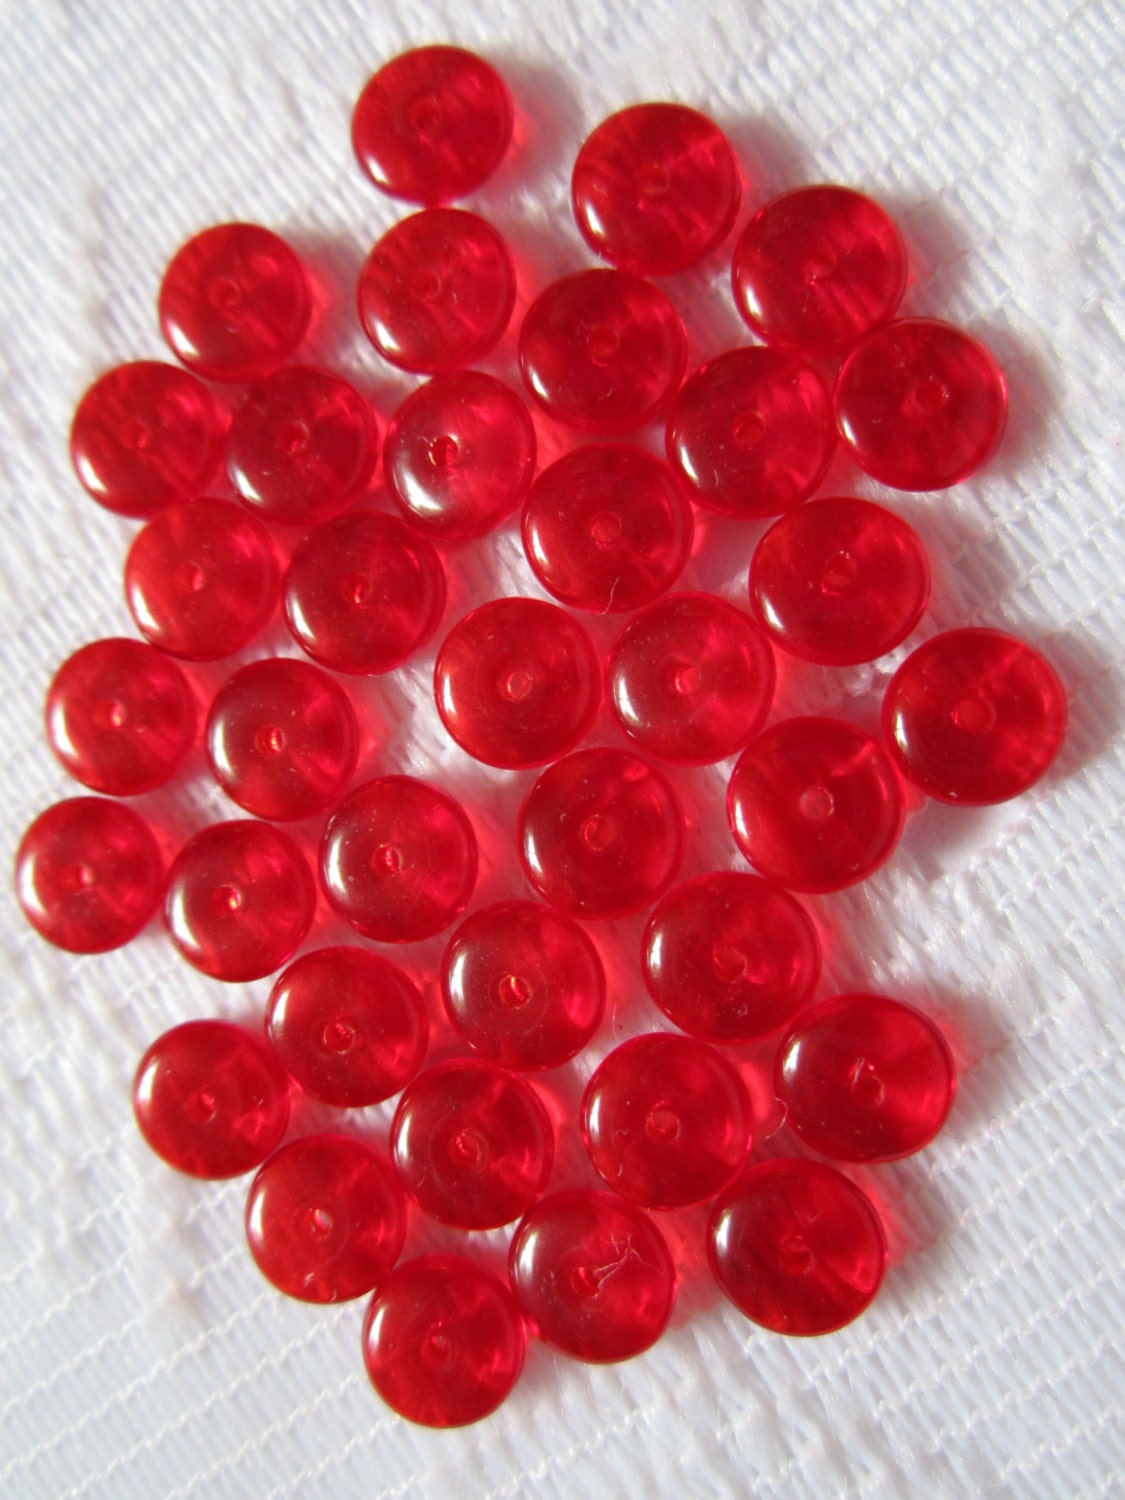 50 Pcs Red Glass Beads for Jewelry Making, 4mm 6mm 8mm Transparent